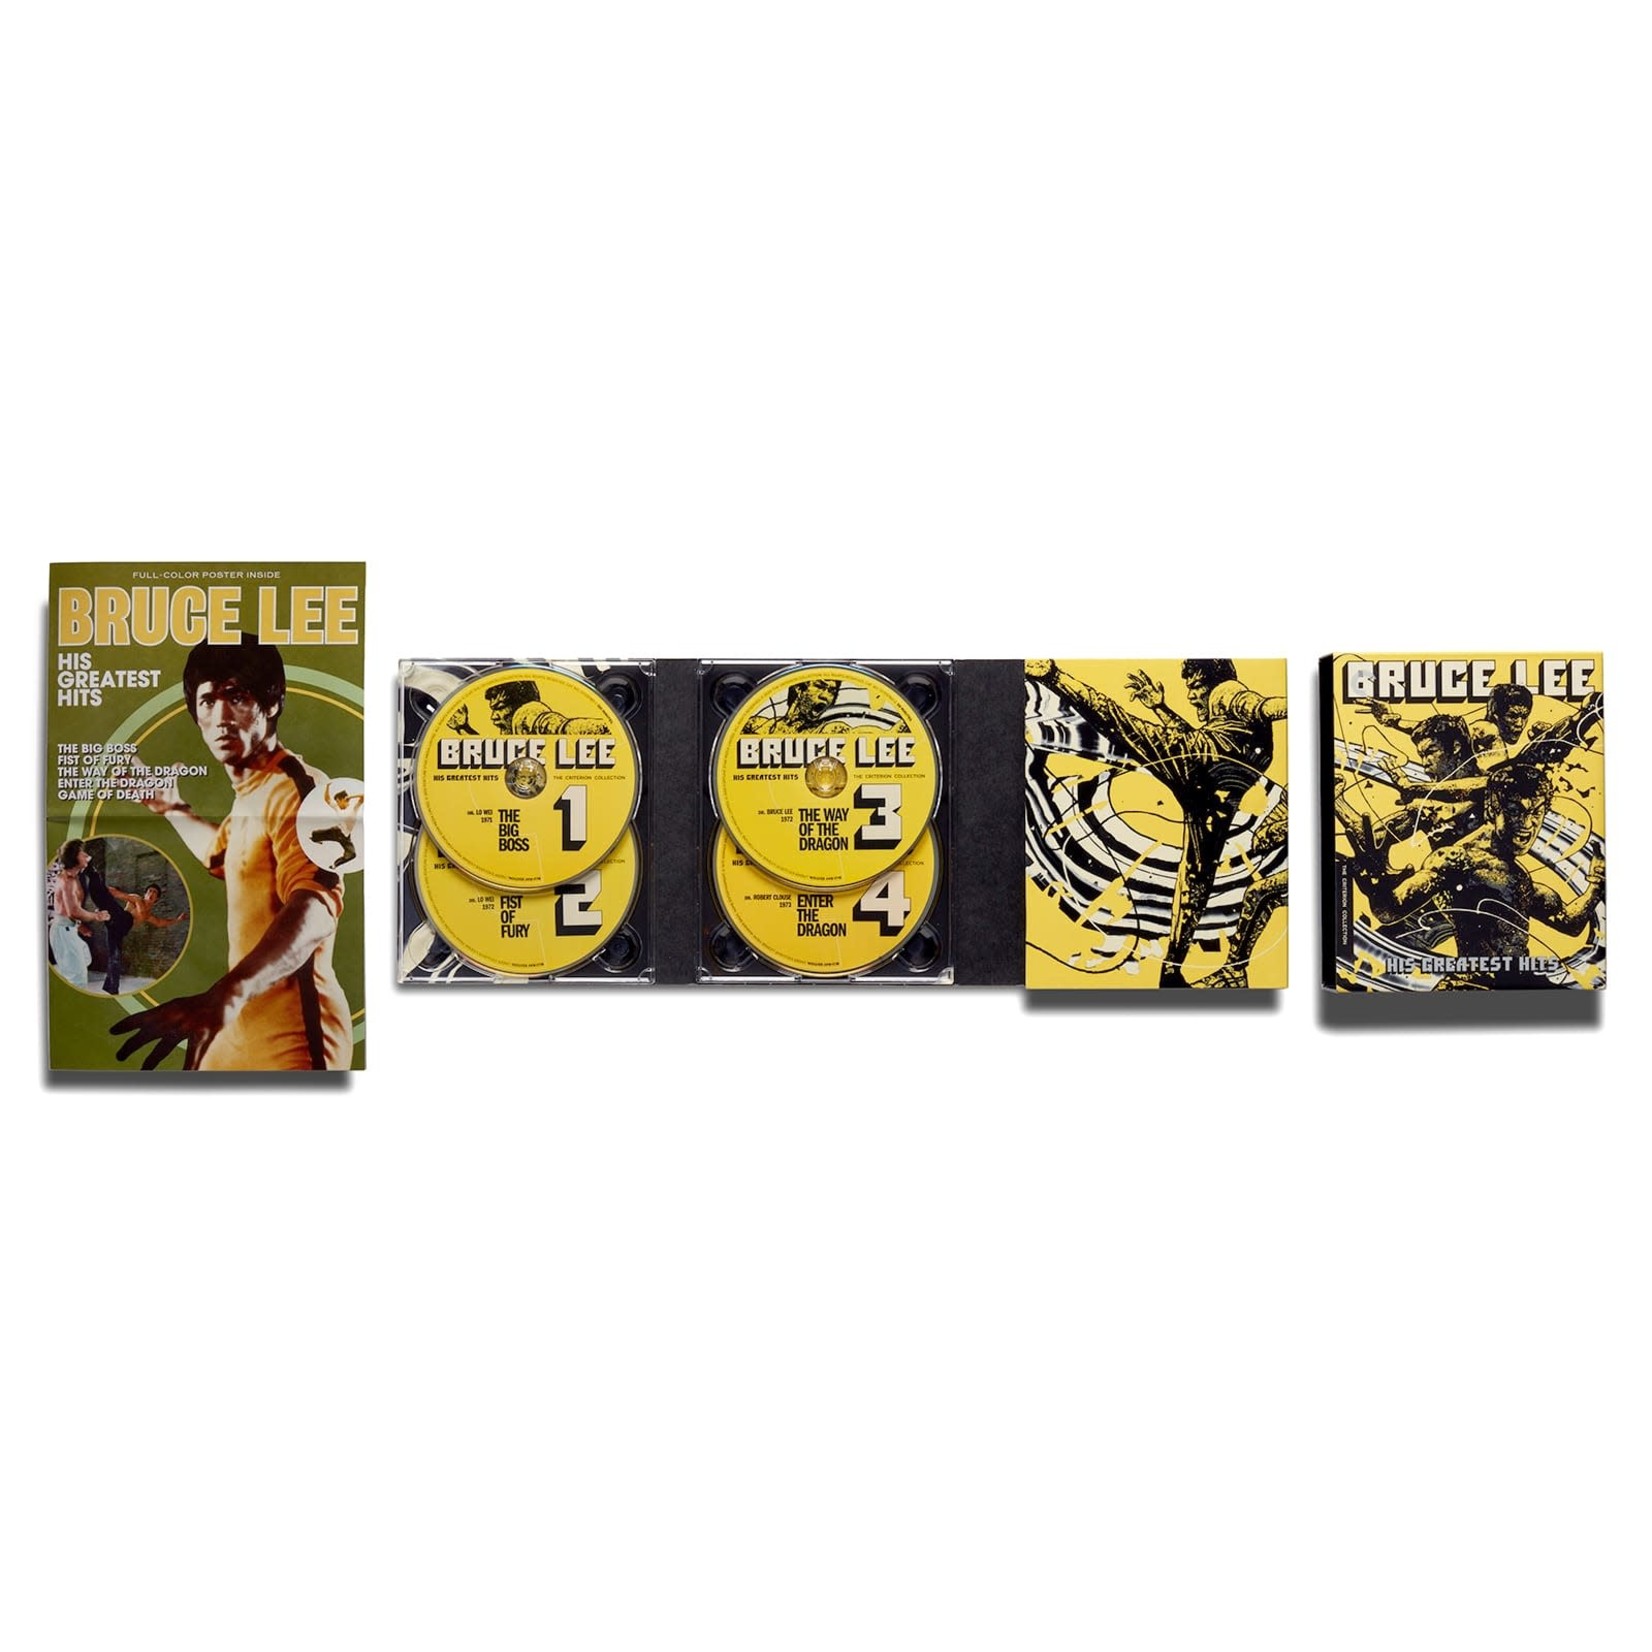 Criterion Collection Bruce Lee - His Greatest Hits: The Big Boss / Fist of Fury / The Way of the Dragon / Enter the Dragon / Game of Death (7BD)